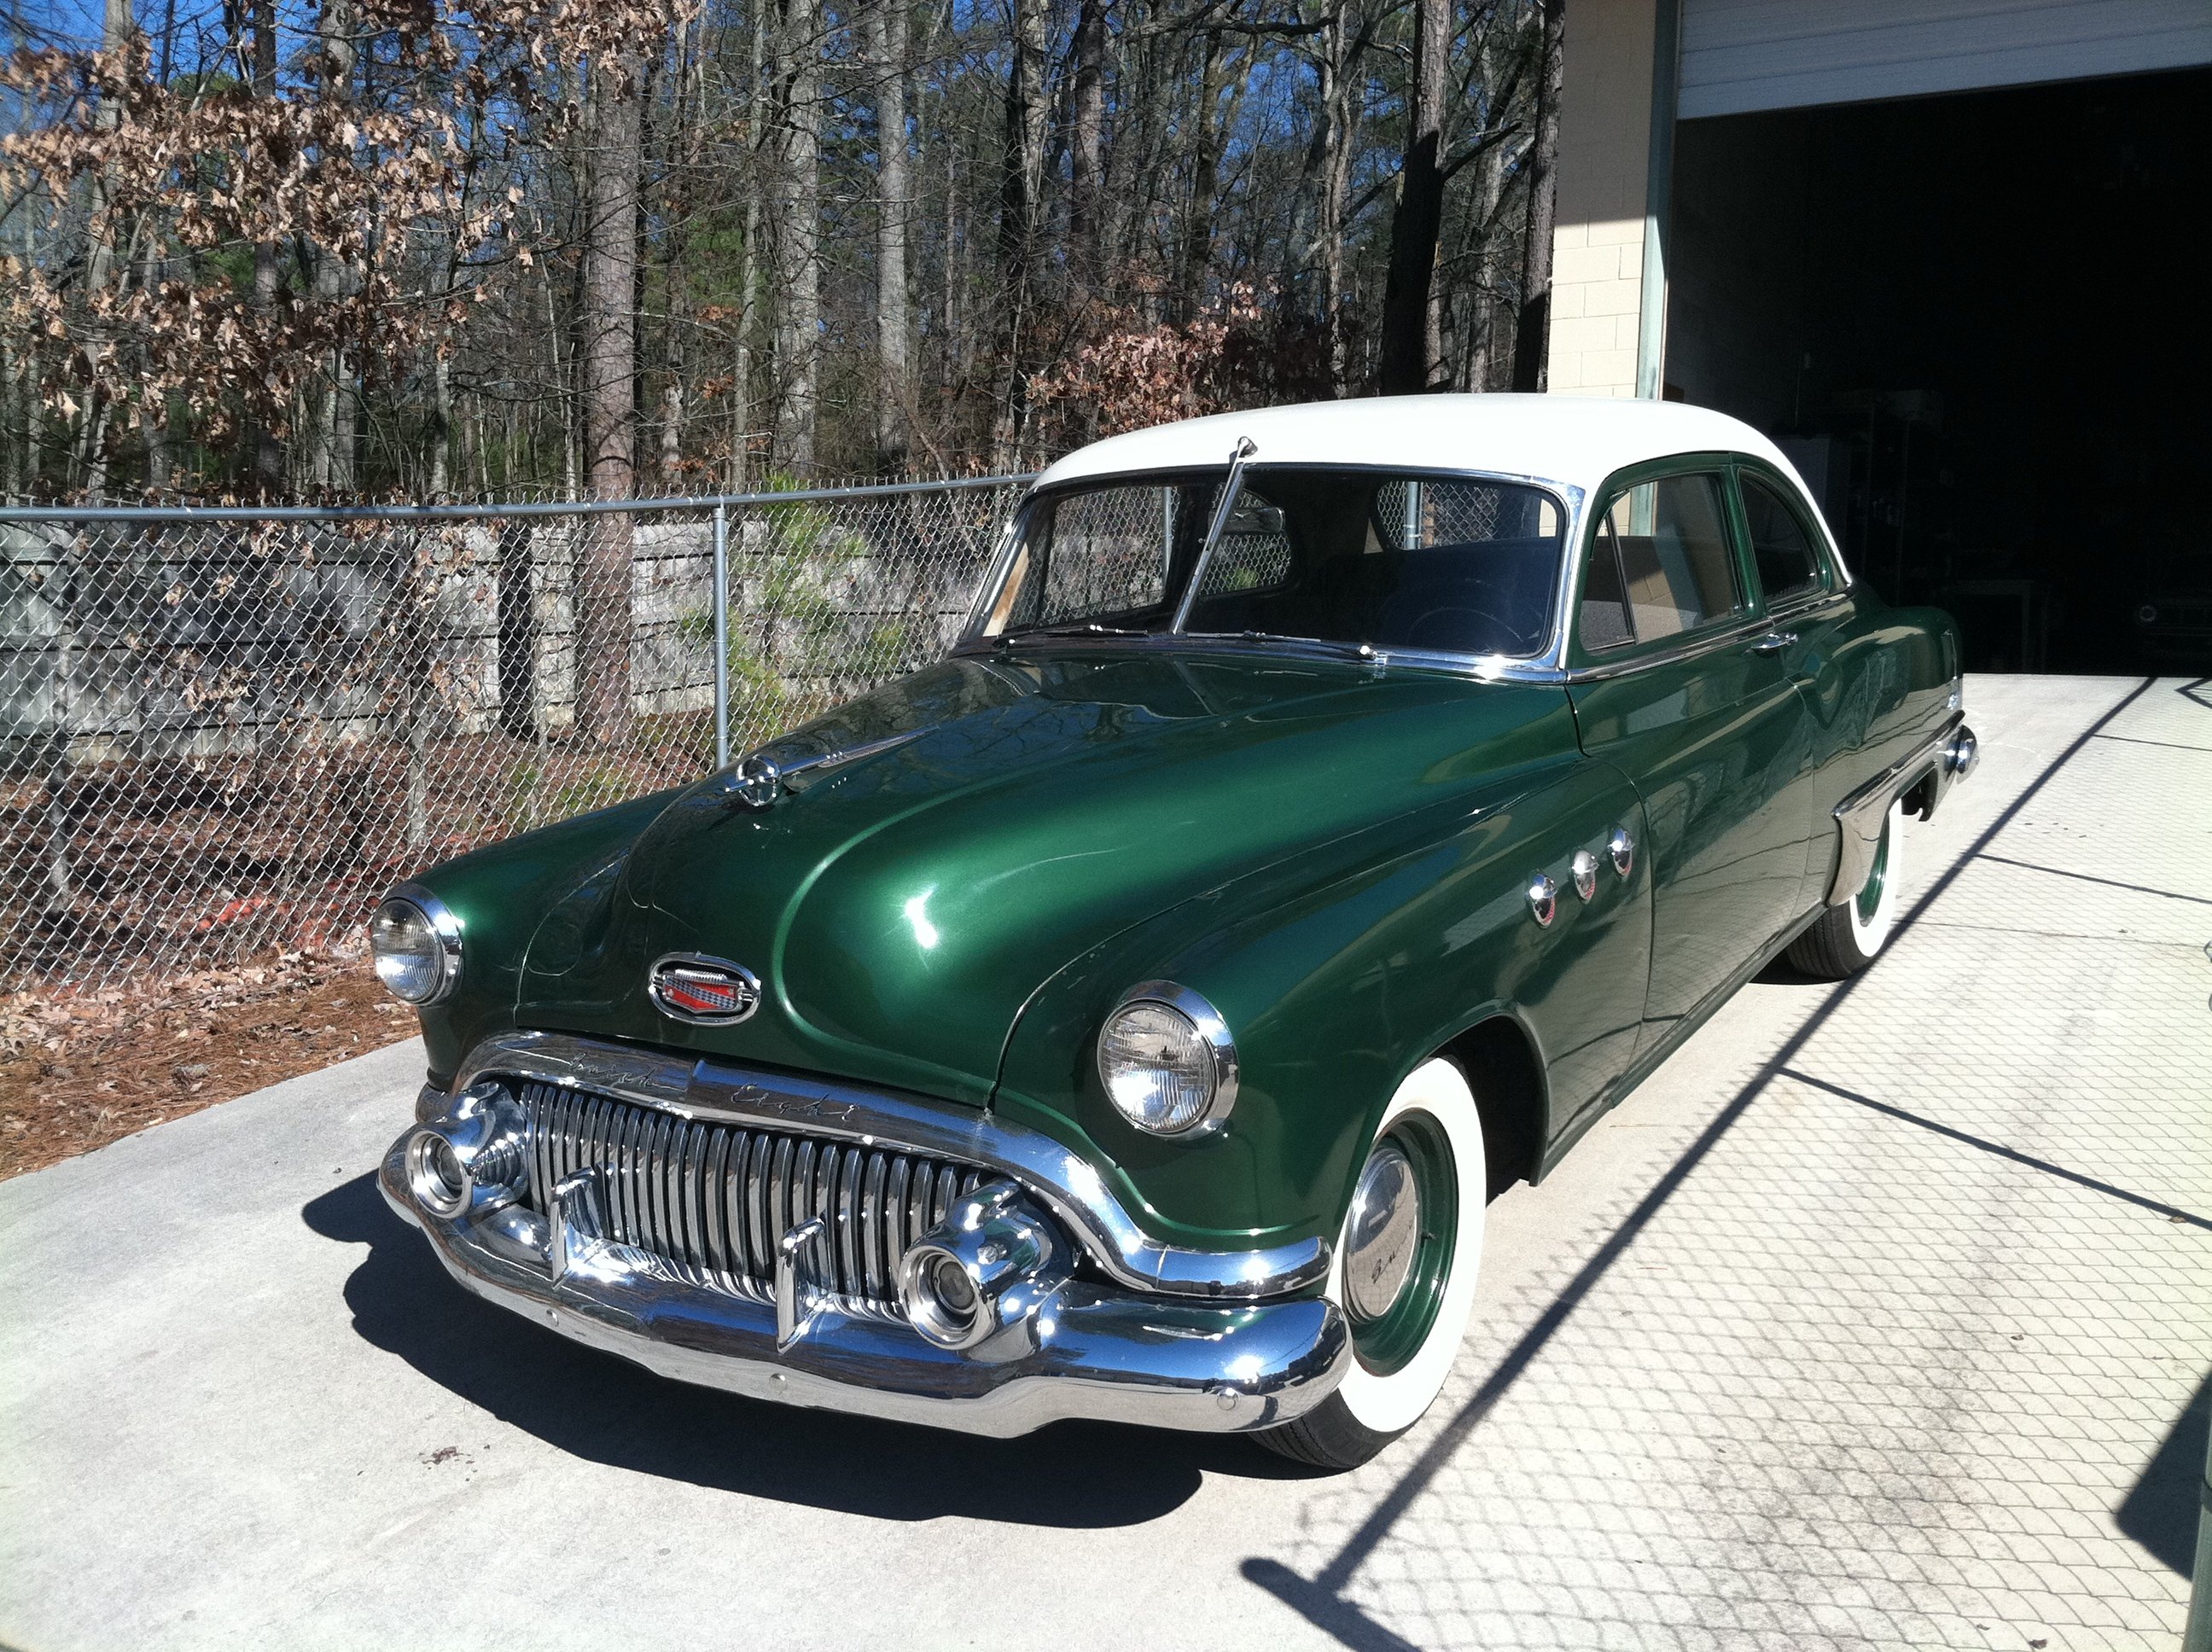 1951, Buick, Eight, Coupe, Special, Classic, Old, Vintage, Usa, 2592x1936 10 Wallpaper